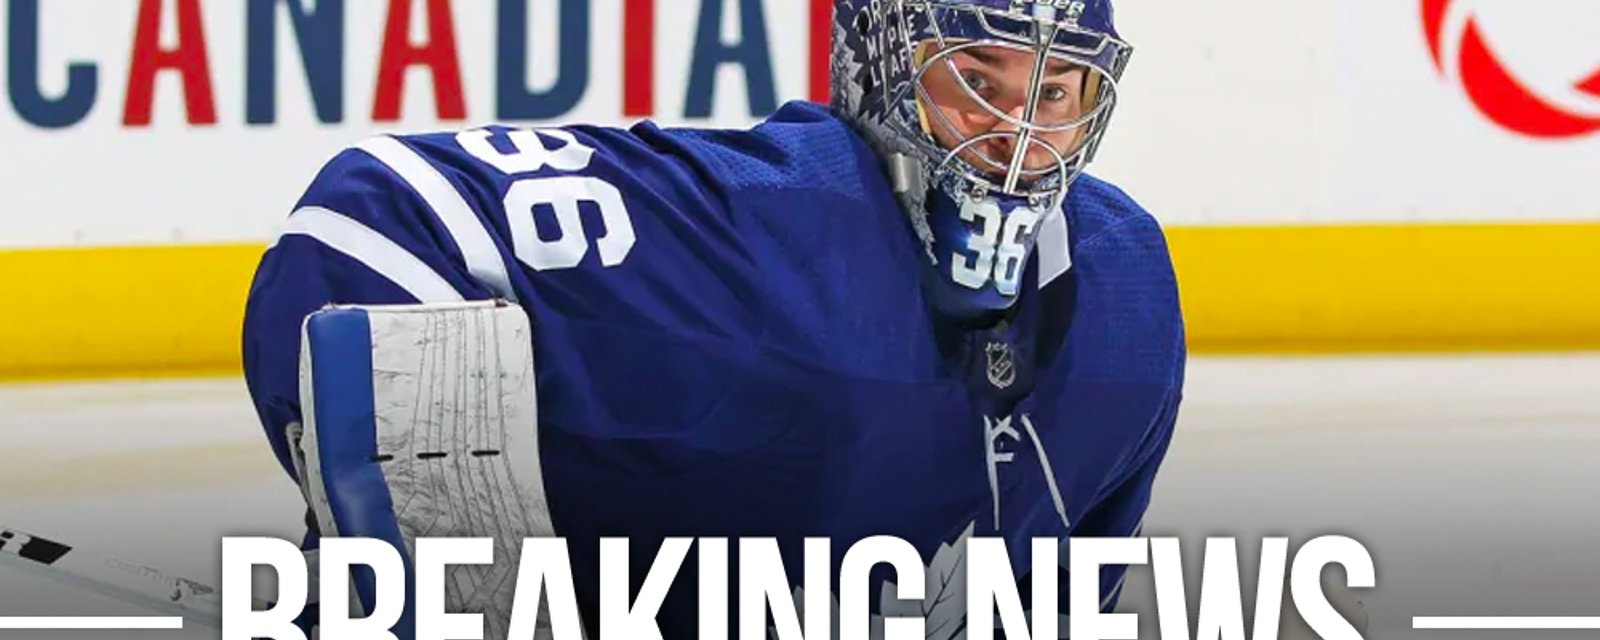 More bad injury news for Leafs, will dress rookie Vehvilainen in goal tonight